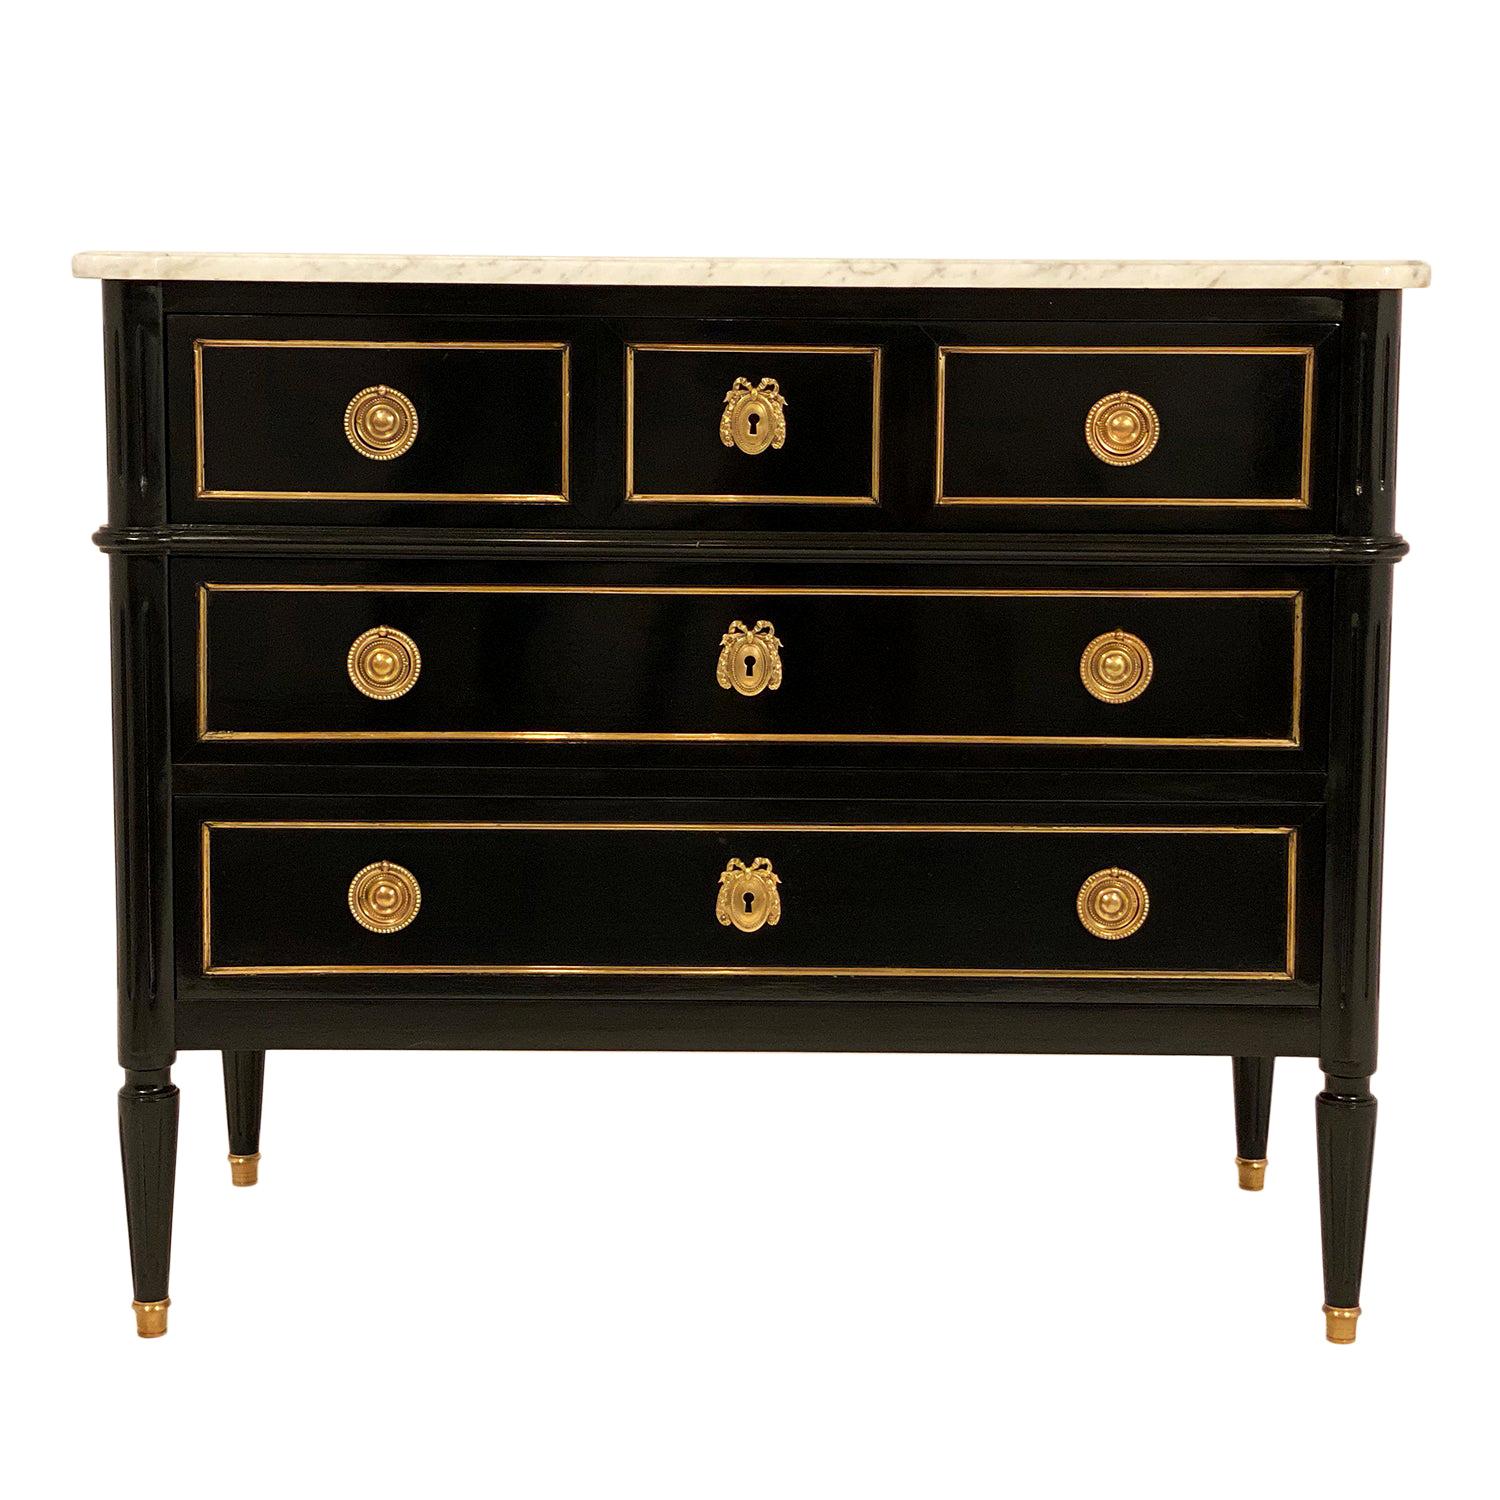 Louis XVI style French chest of drawers made of mahogany that has been ebonized and finished with a lustrous museum quality French polish. Three dovetailed drawers are embellished with finely cast gilt bronze hardware and brass trim throughout. The